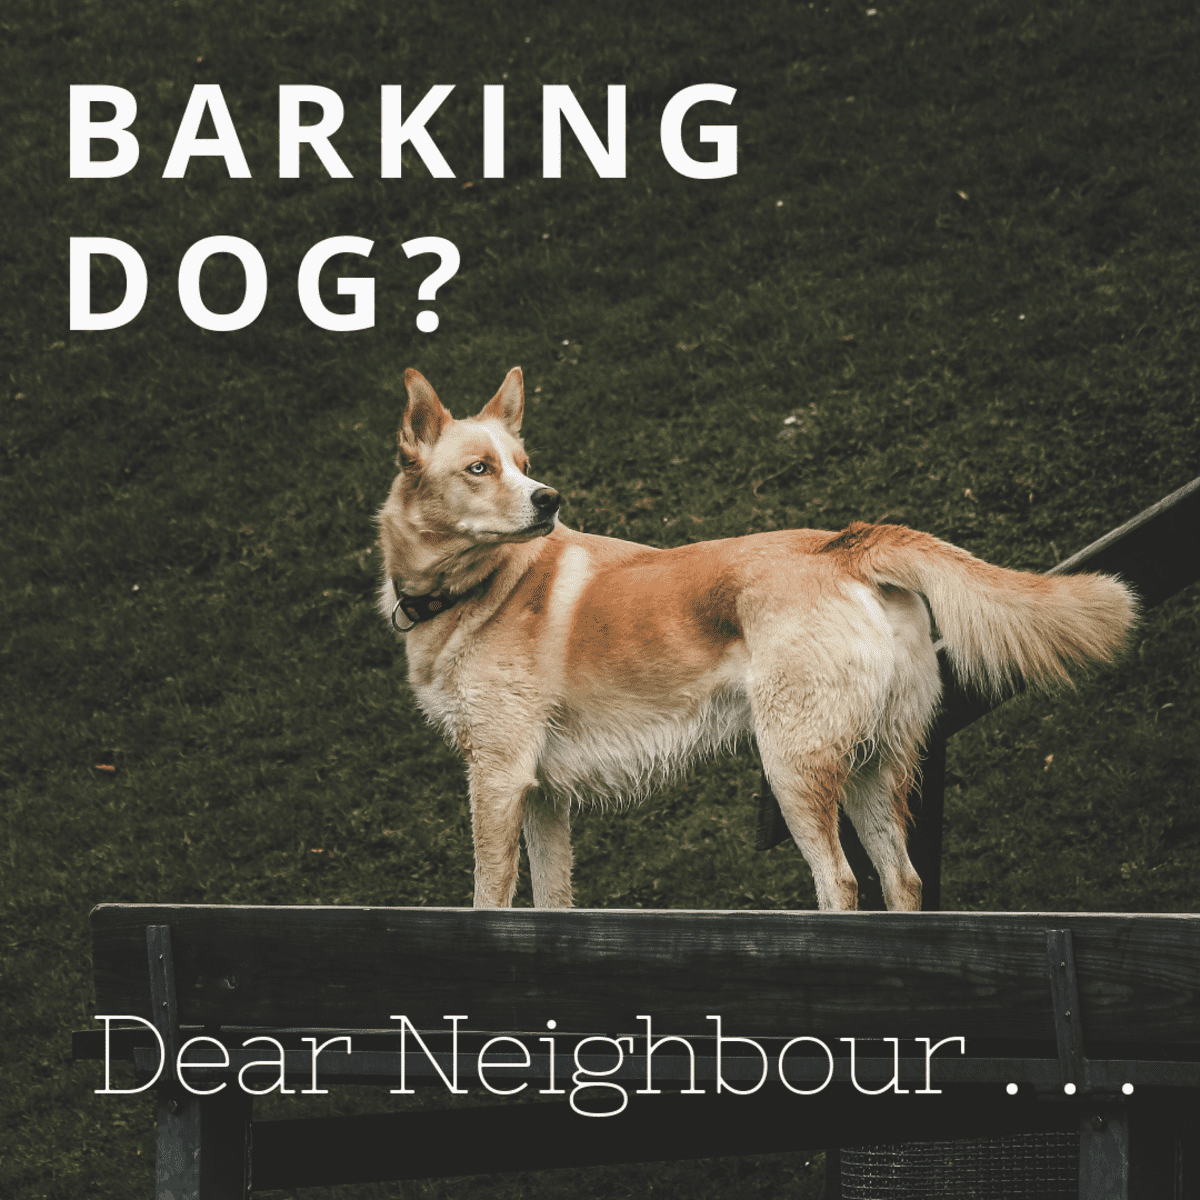 can you complain about a dog barking